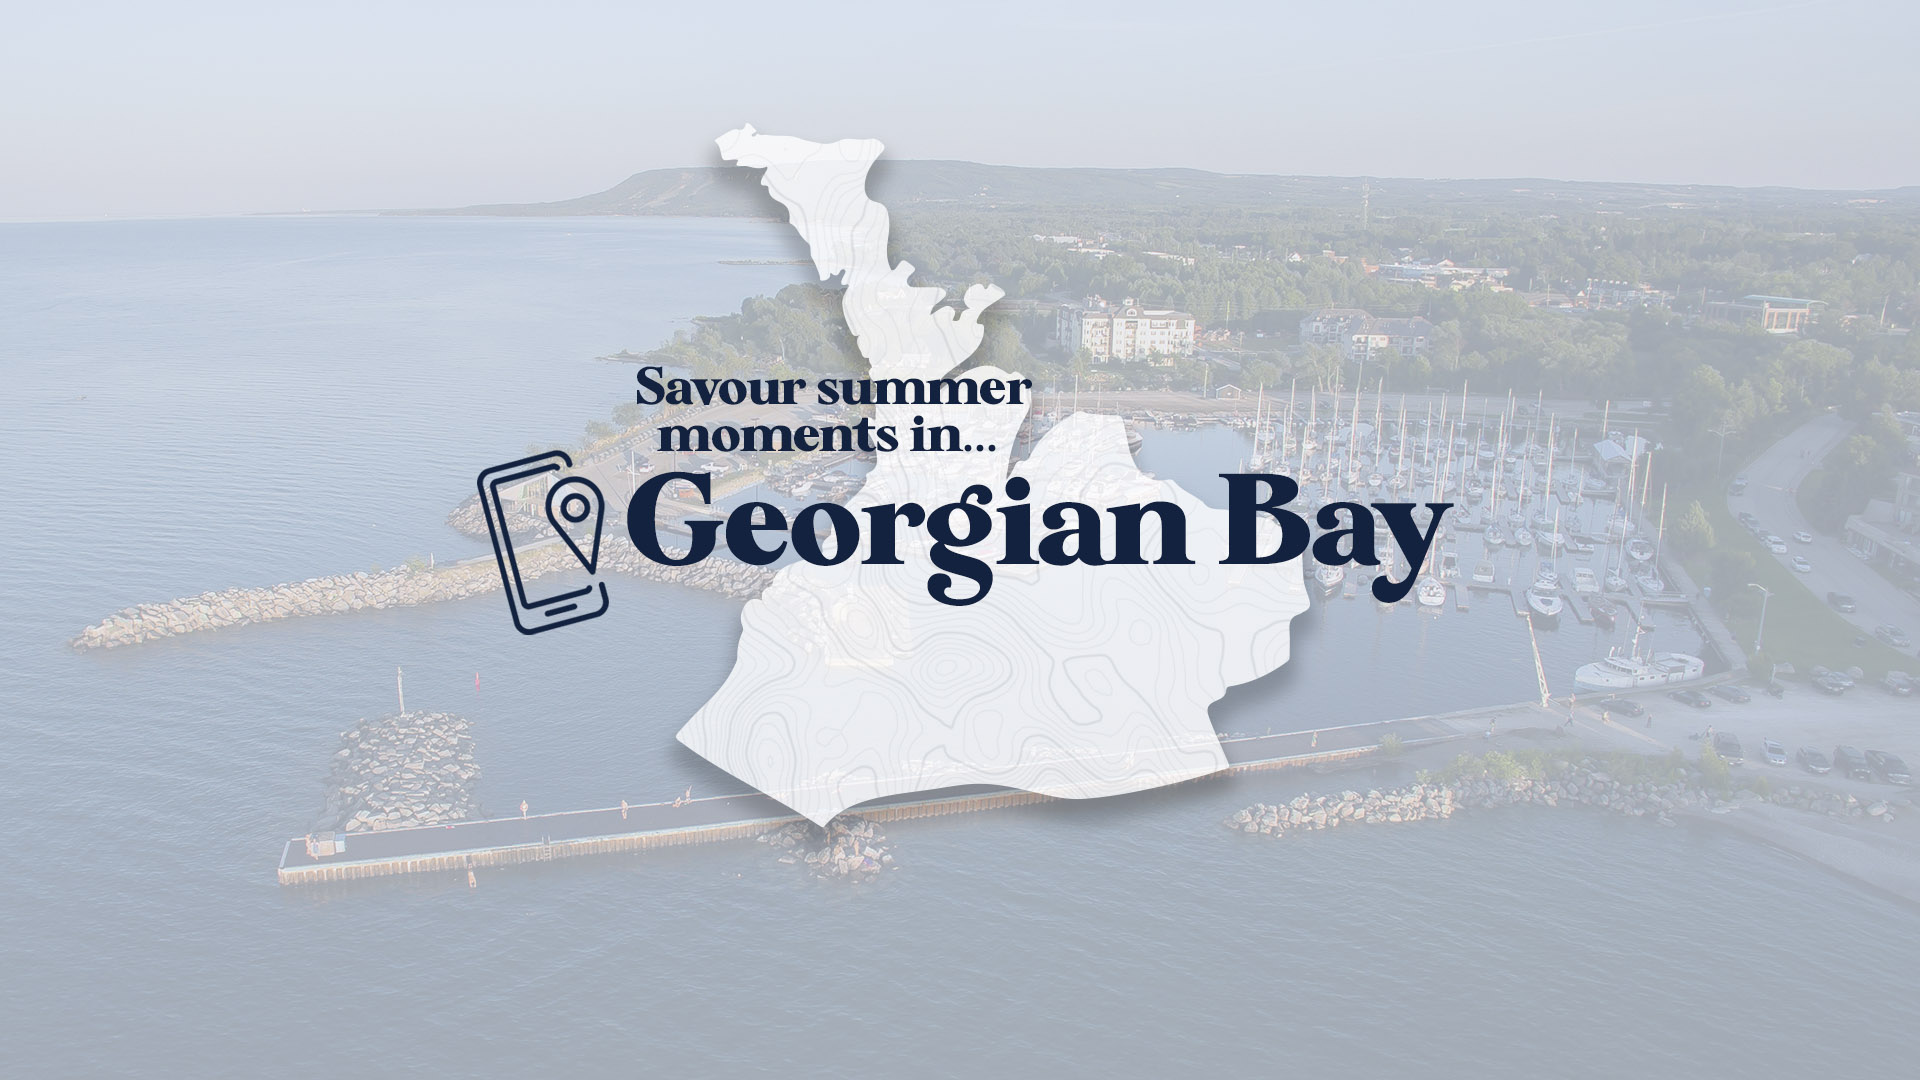 A photo of Georgian Bay with the Savour Summer Moments in Georgian Bay logo over top.